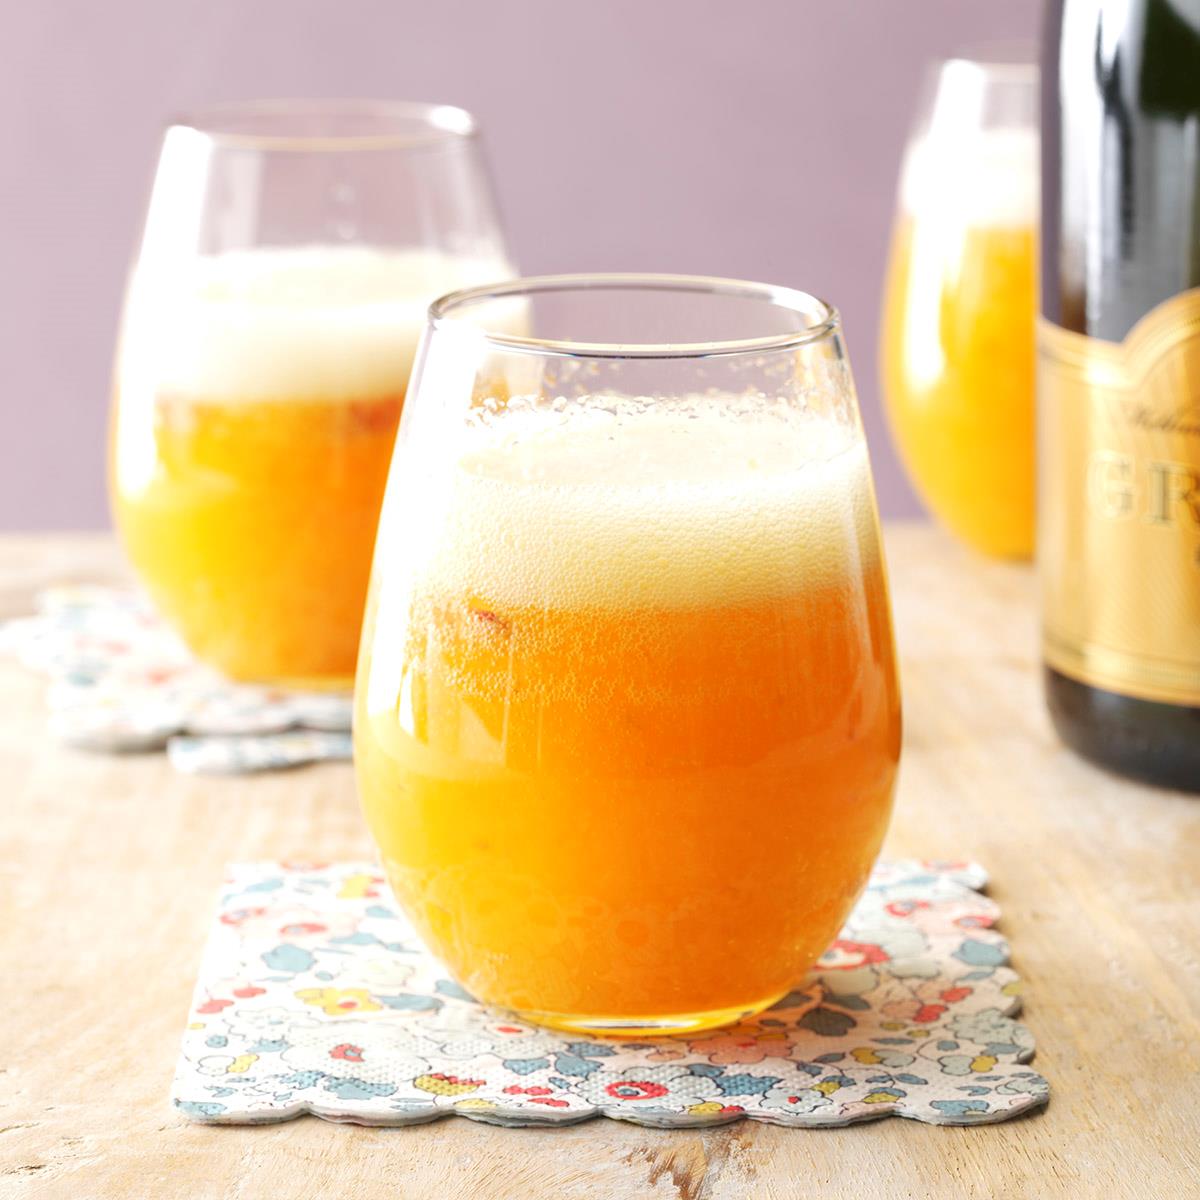 Peach Bellini Recipe - Frozen Peach Bellini Recipe • Wanderlust and Wellness : Though classic bellinis are made with white peaches, we find frozen yellow peaches easiest to come by outside of late summer.